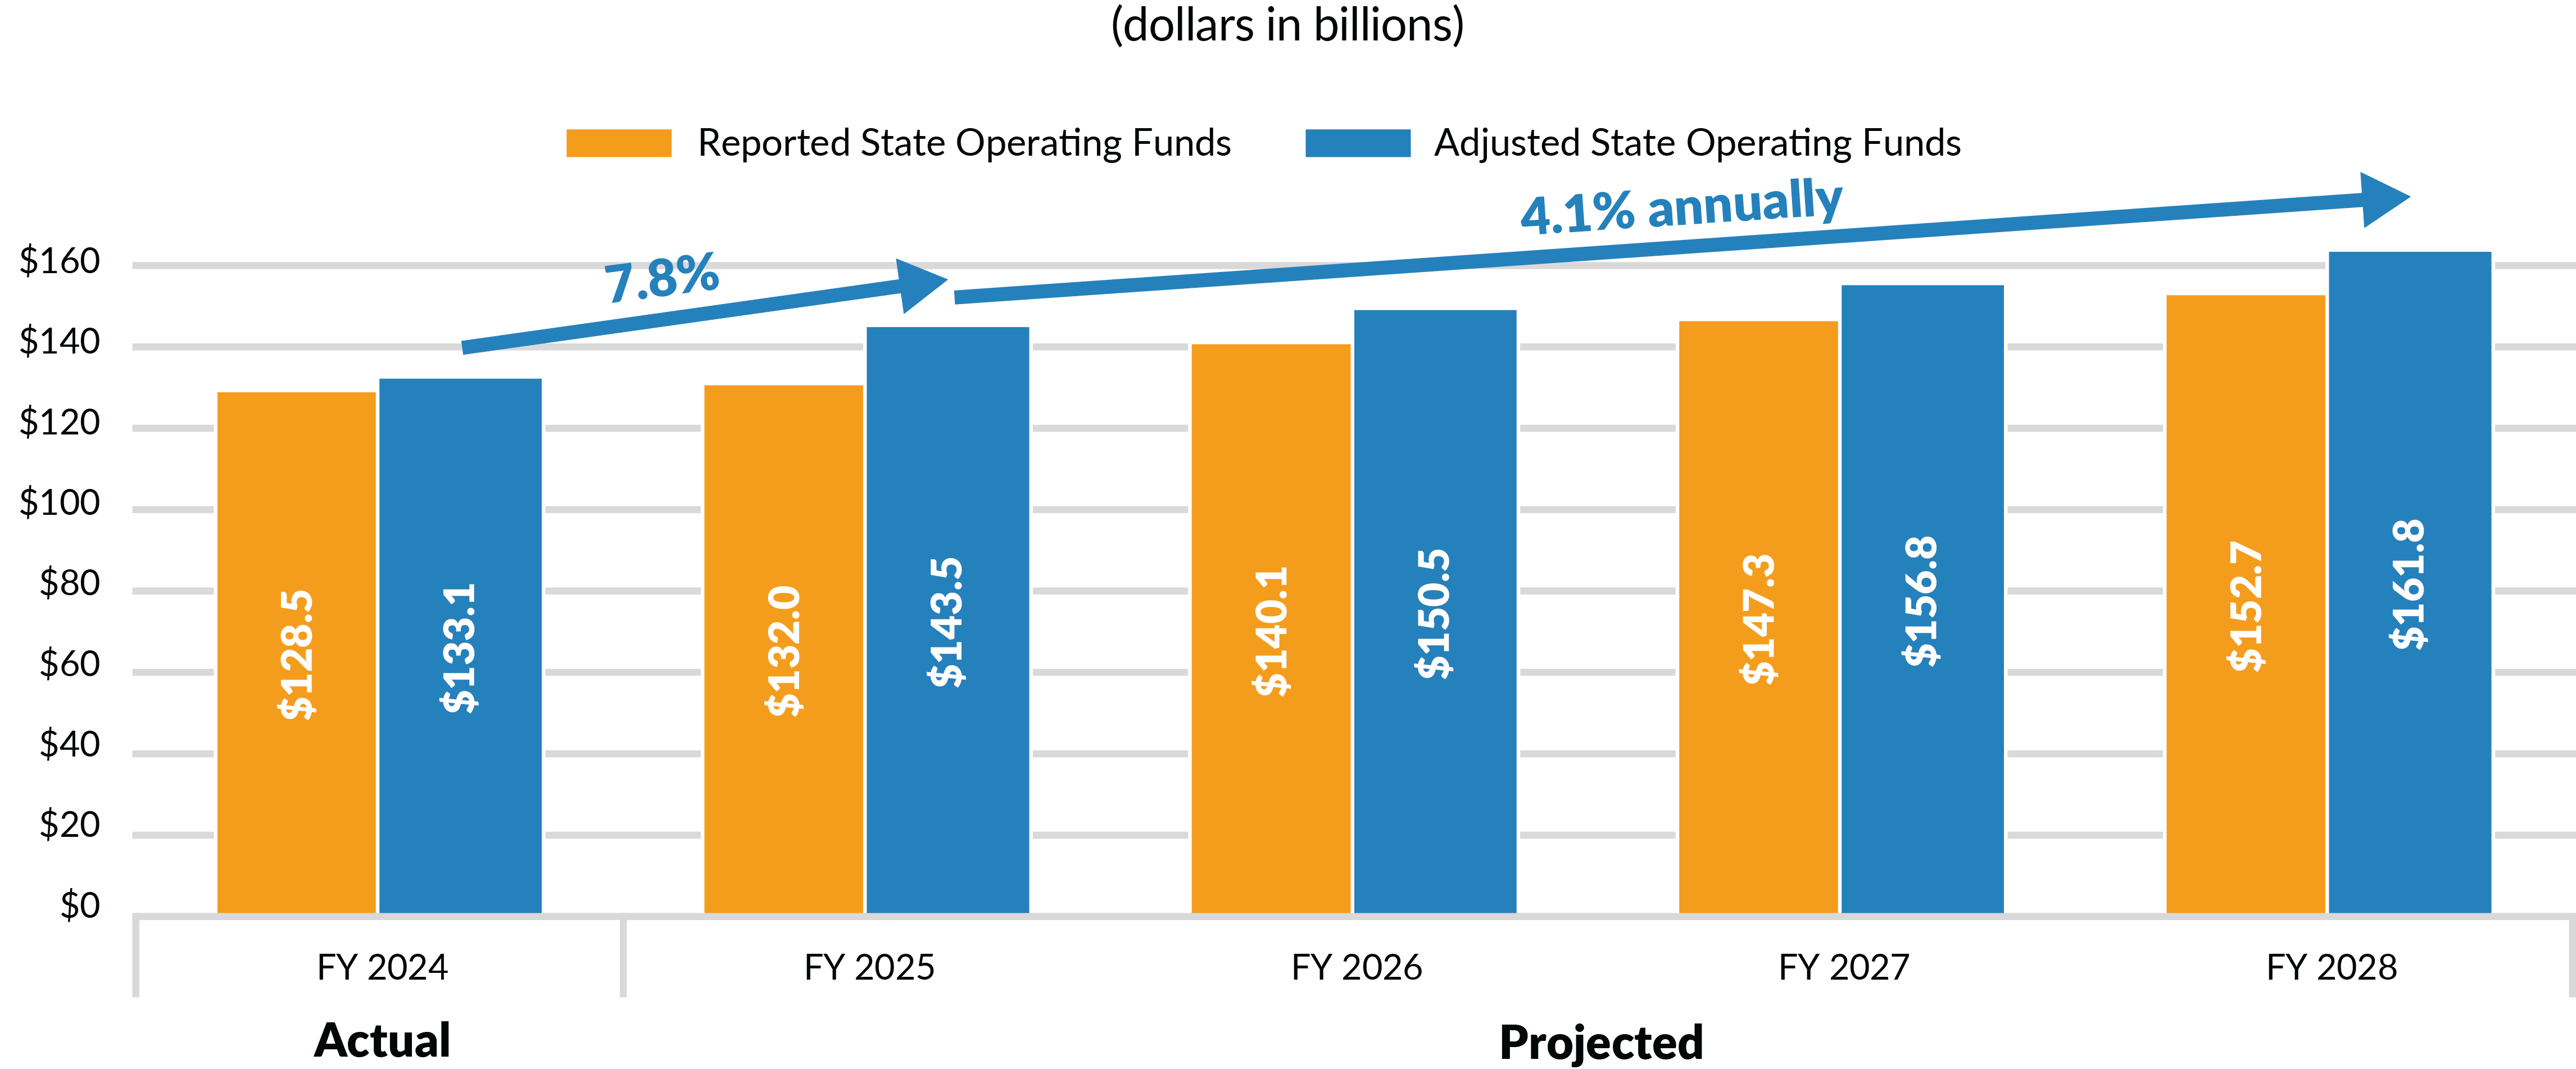 State Spending Climbing Steadily, Causing Structural Gaps